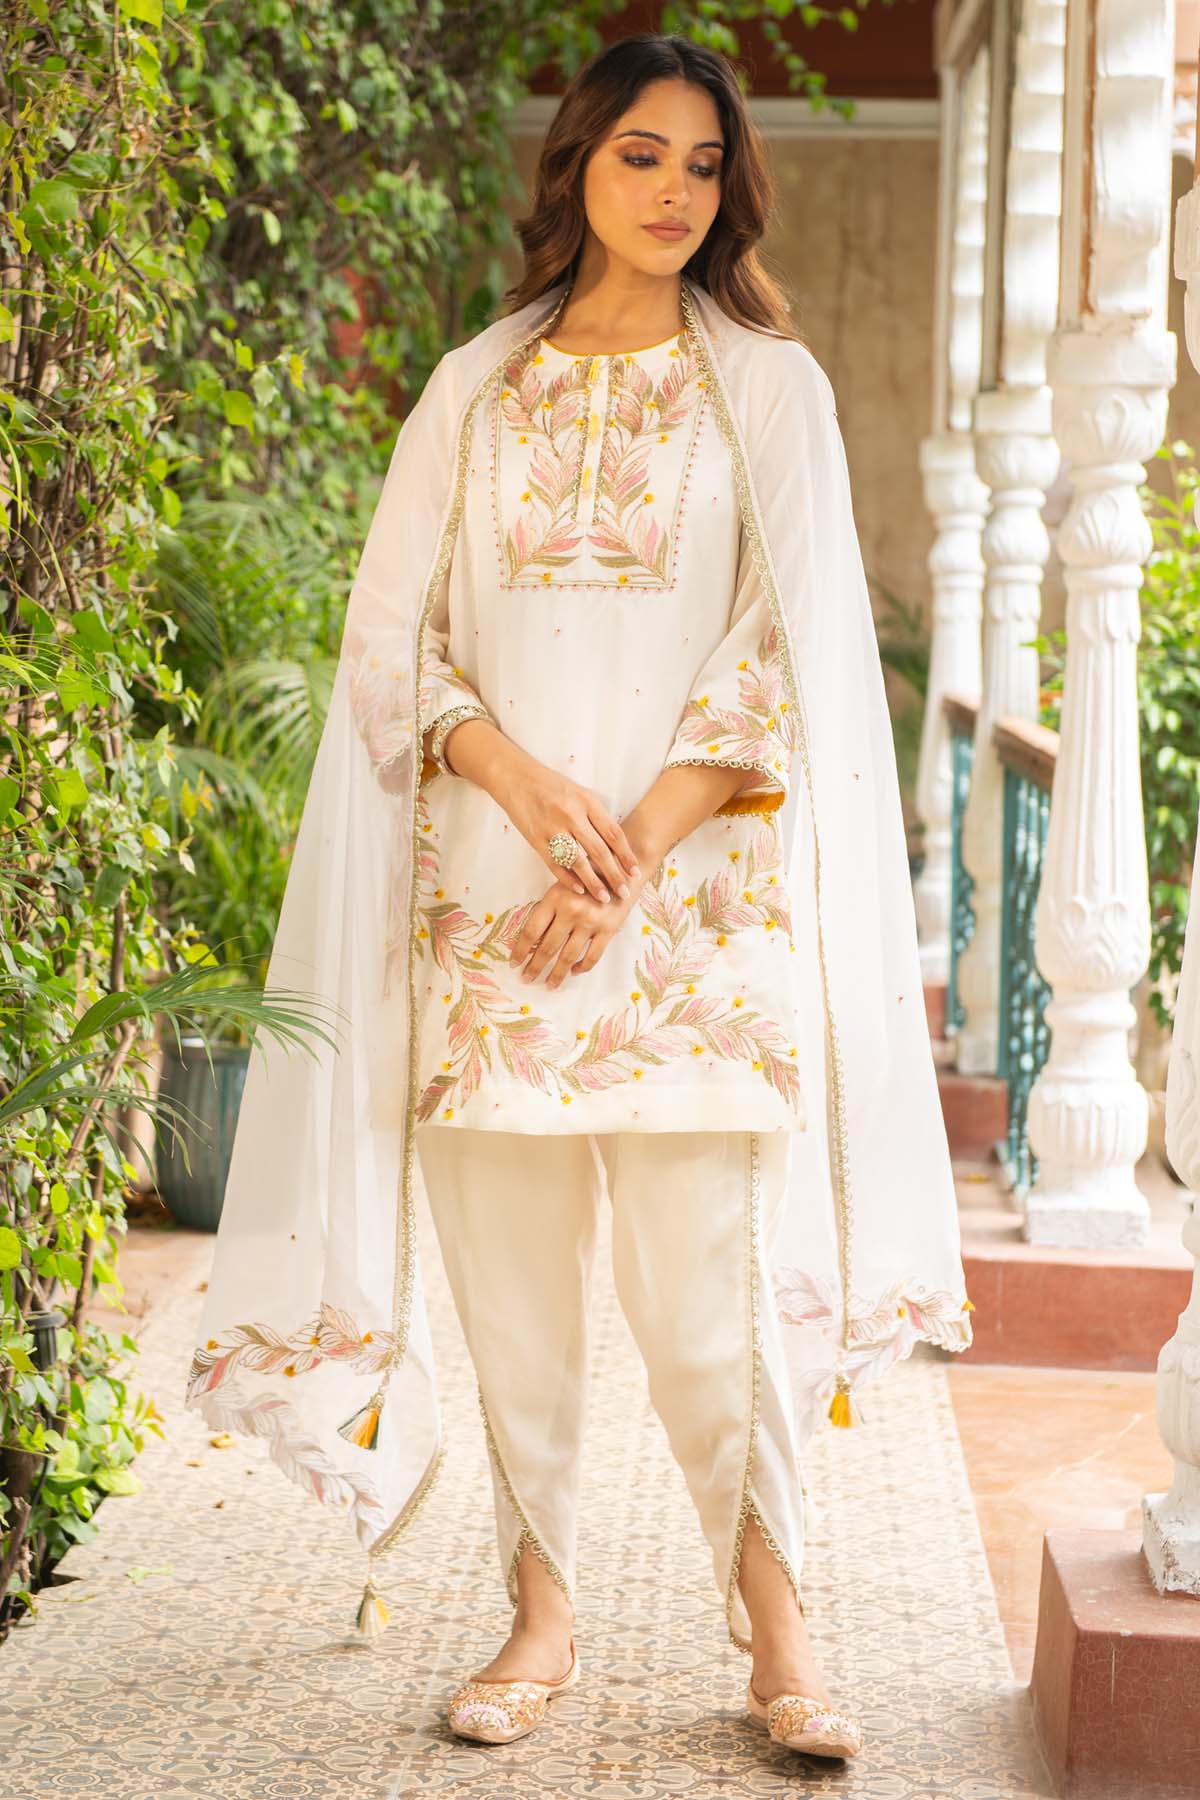 Ajiesh Oberoi Ivory Embroidered Dhoti Set for women online at ScrollnShops